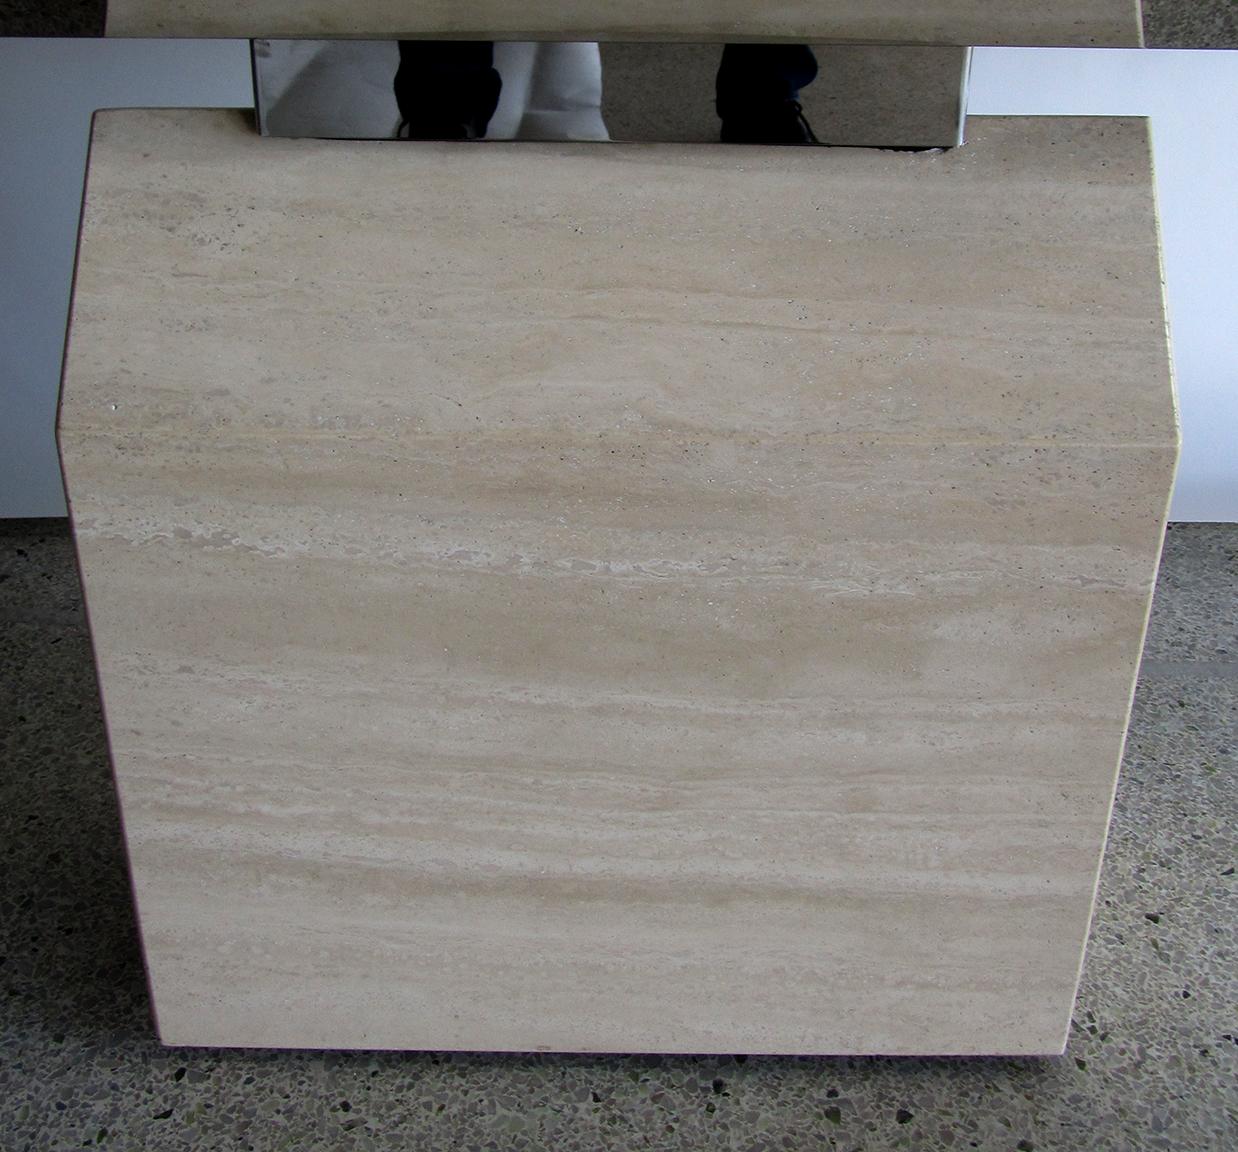 American Modern Chrome and Travertine Illuminated Console Table In Good Condition For Sale In Hollywood, FL